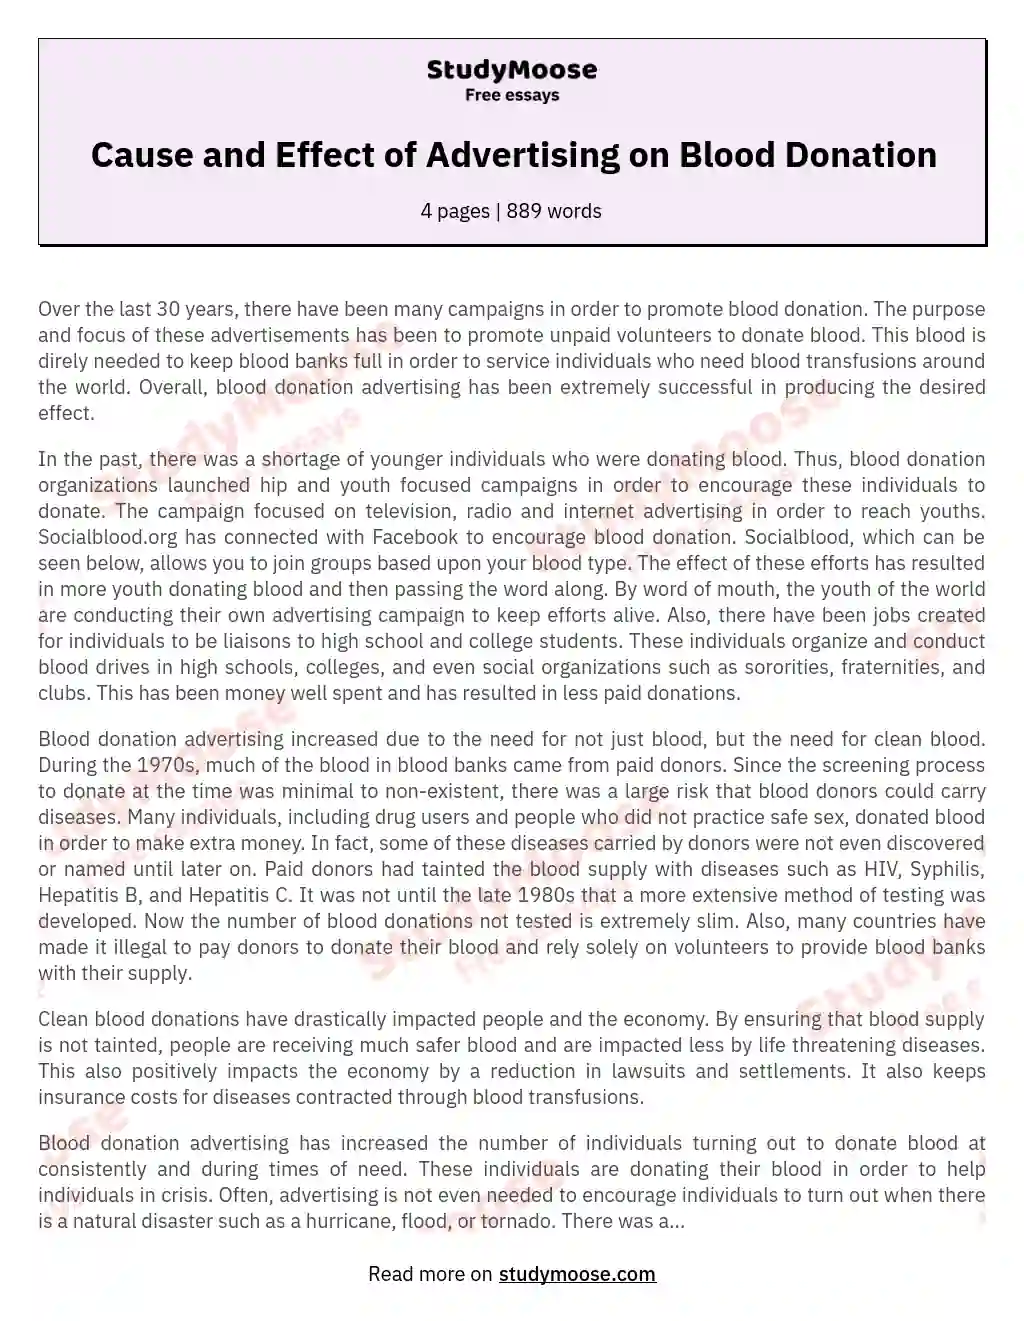 Cause and Effect of Advertising on Blood Donation